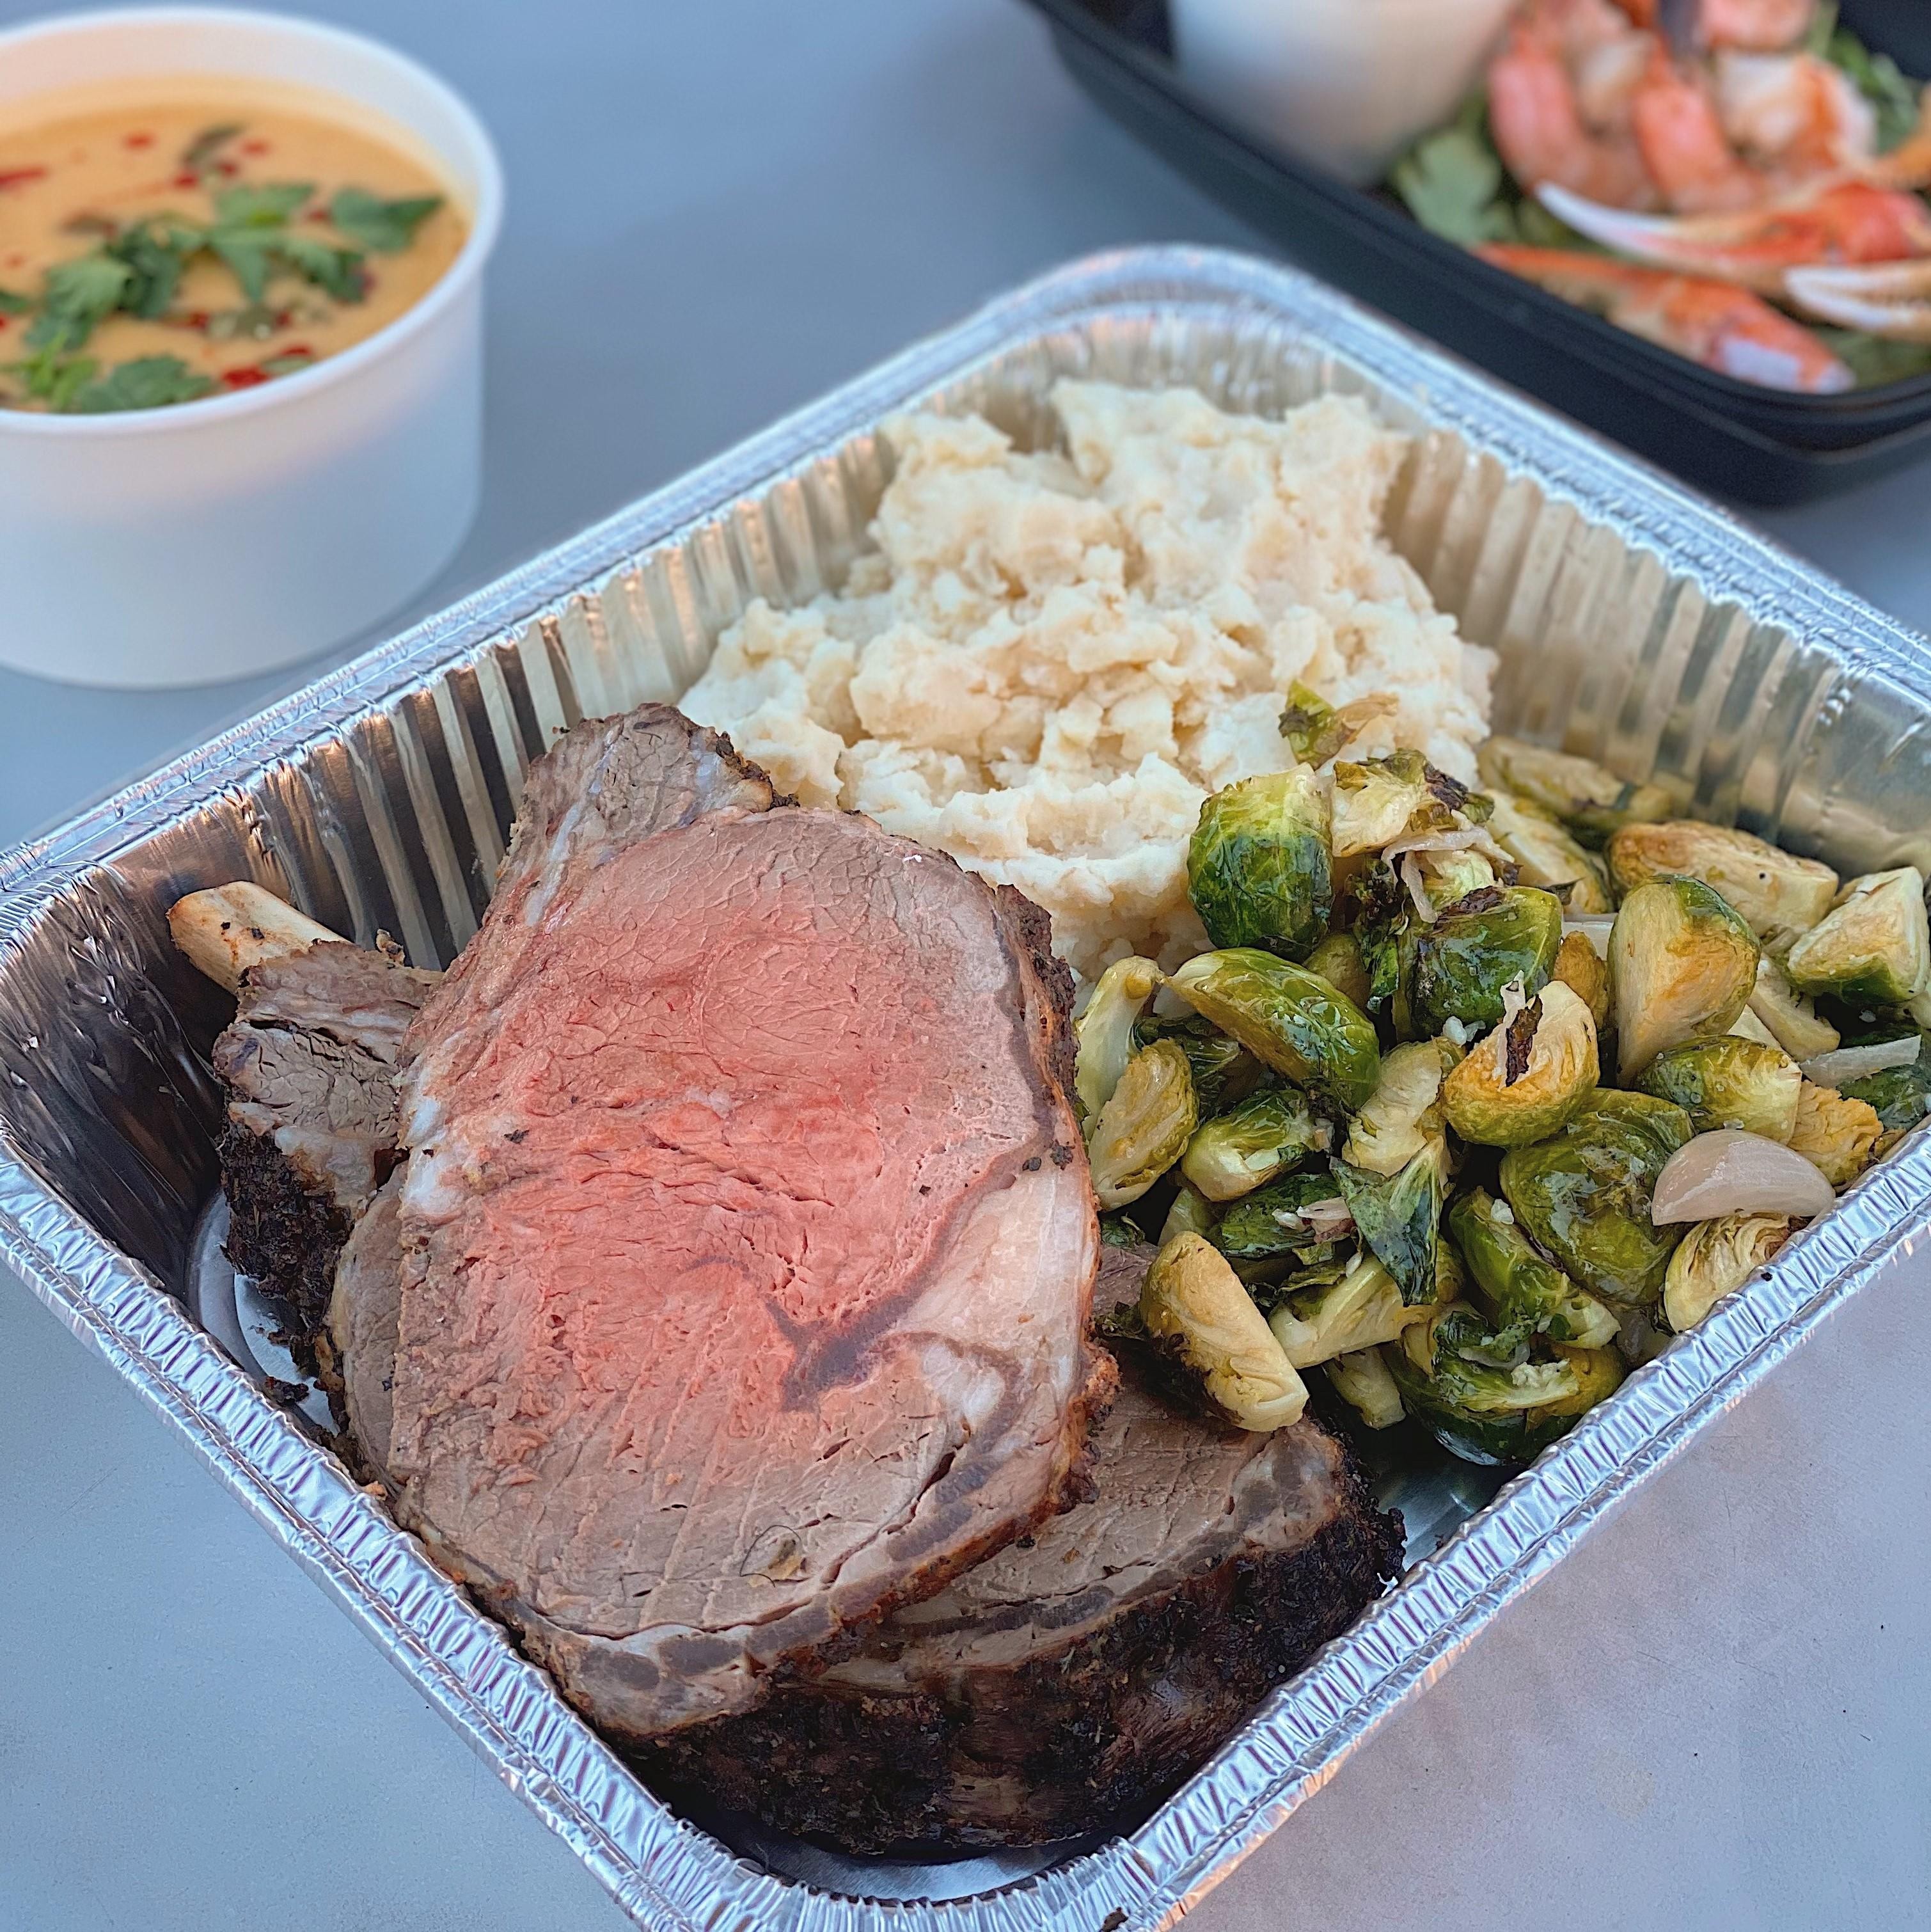 Roasted Prime Rib Dinner for TWO